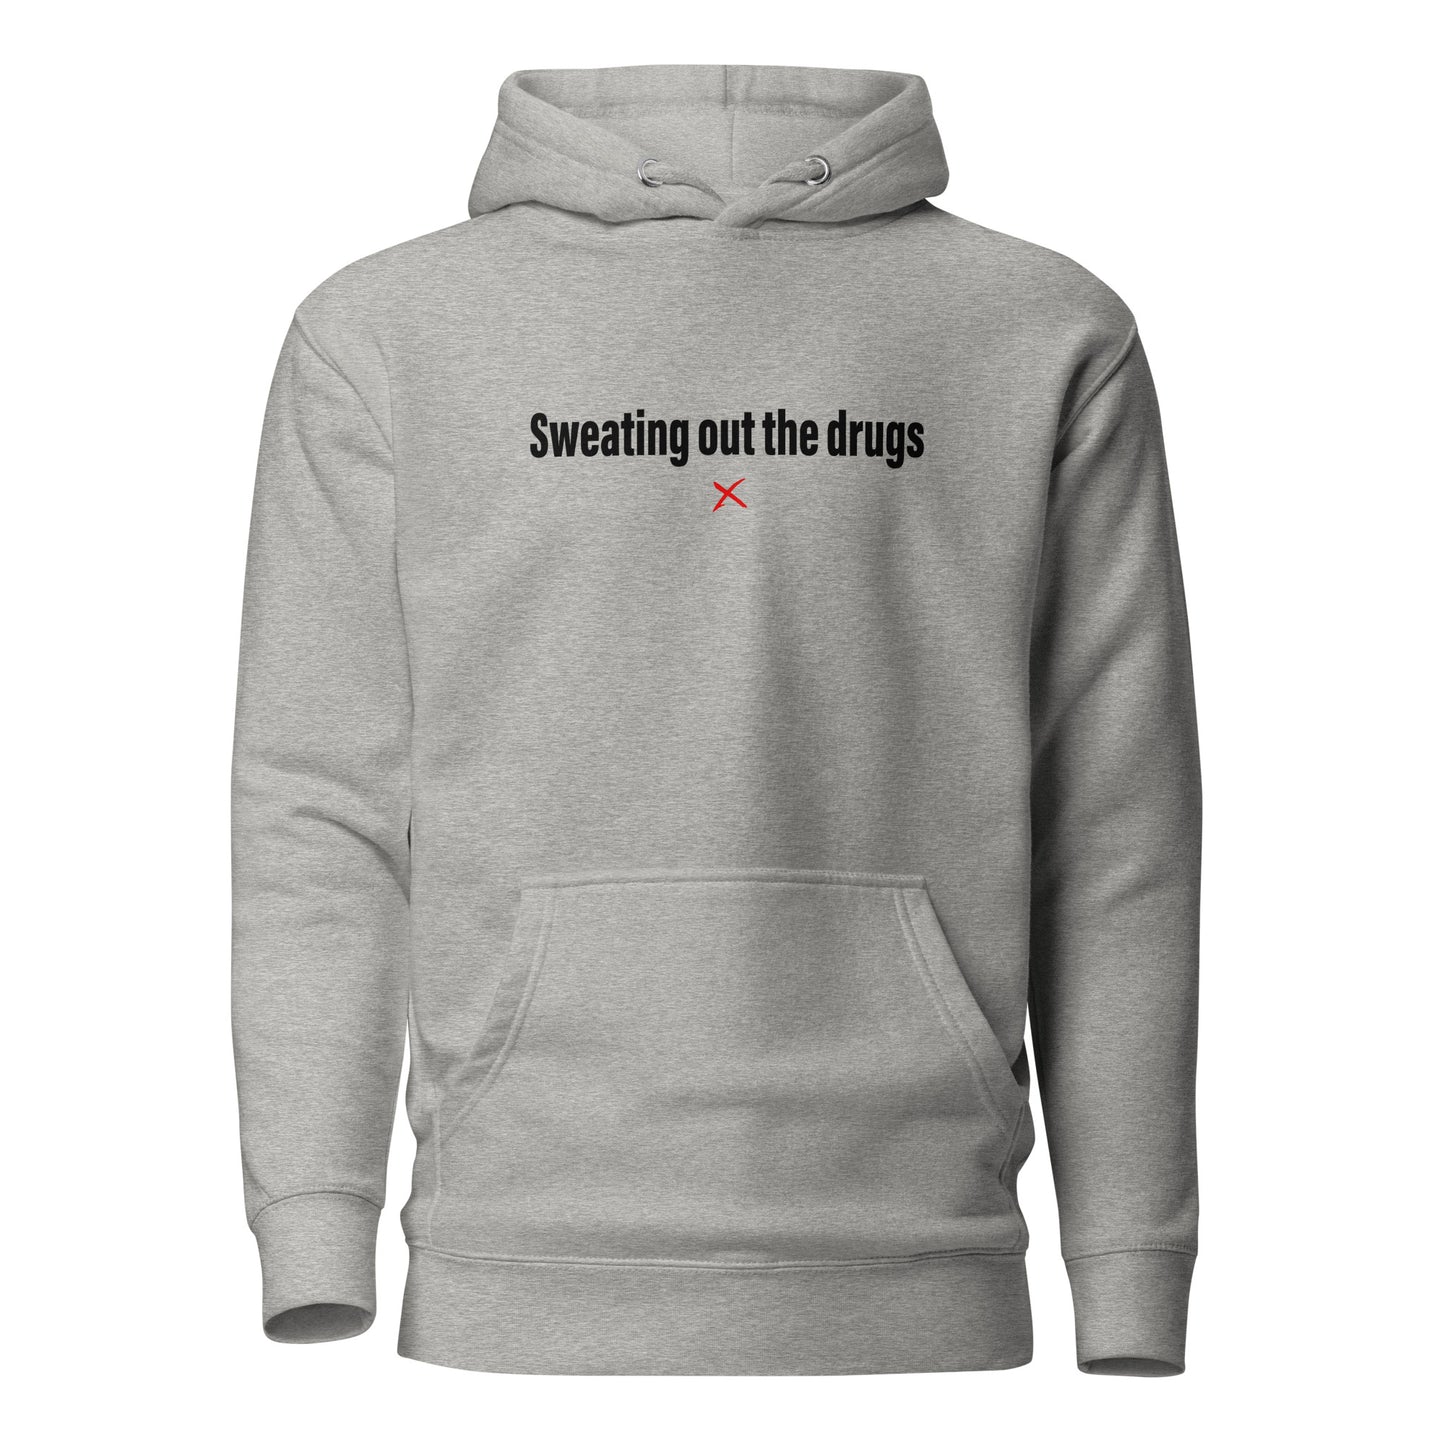 Sweating out the drugs - Hoodie